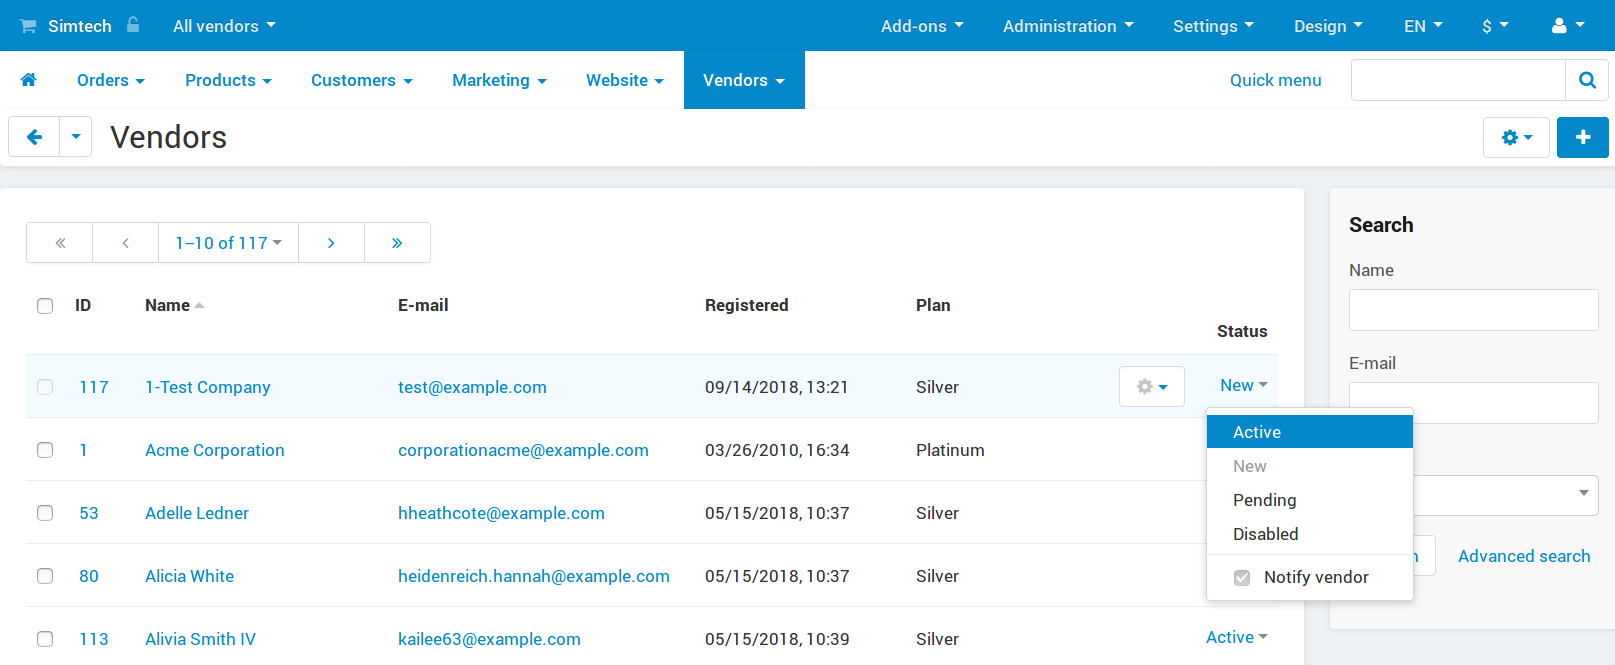 You can change a vendor's status in Multi-Vendor administration panel at any time.